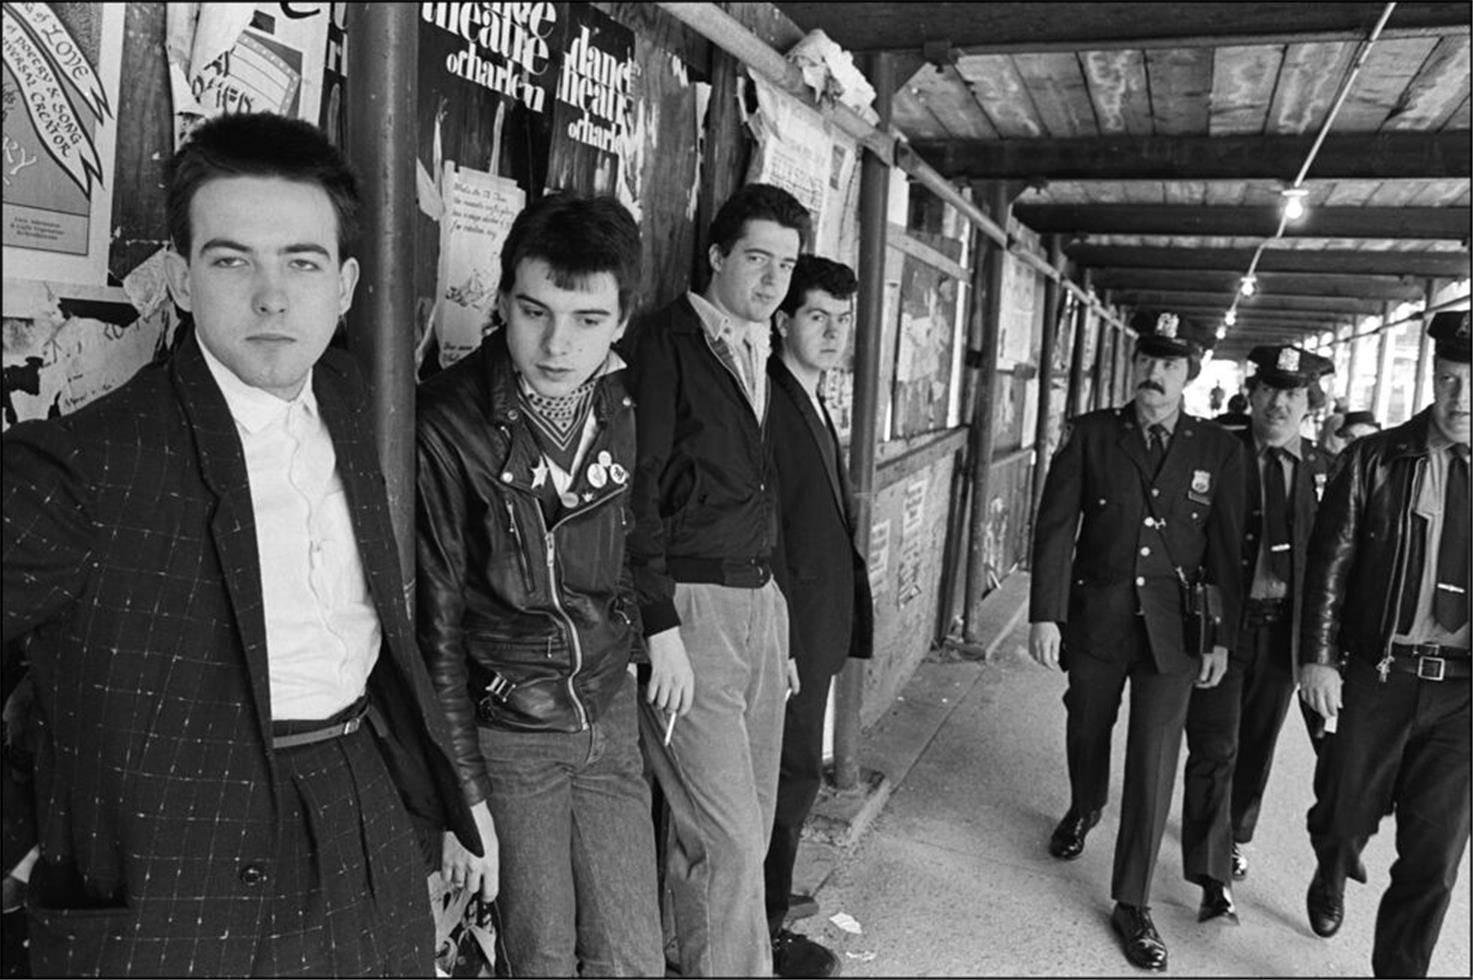 Allan Tannenbaum Black and White Photograph - The Cure, Columbus Ave, NYC, April 11, 1980